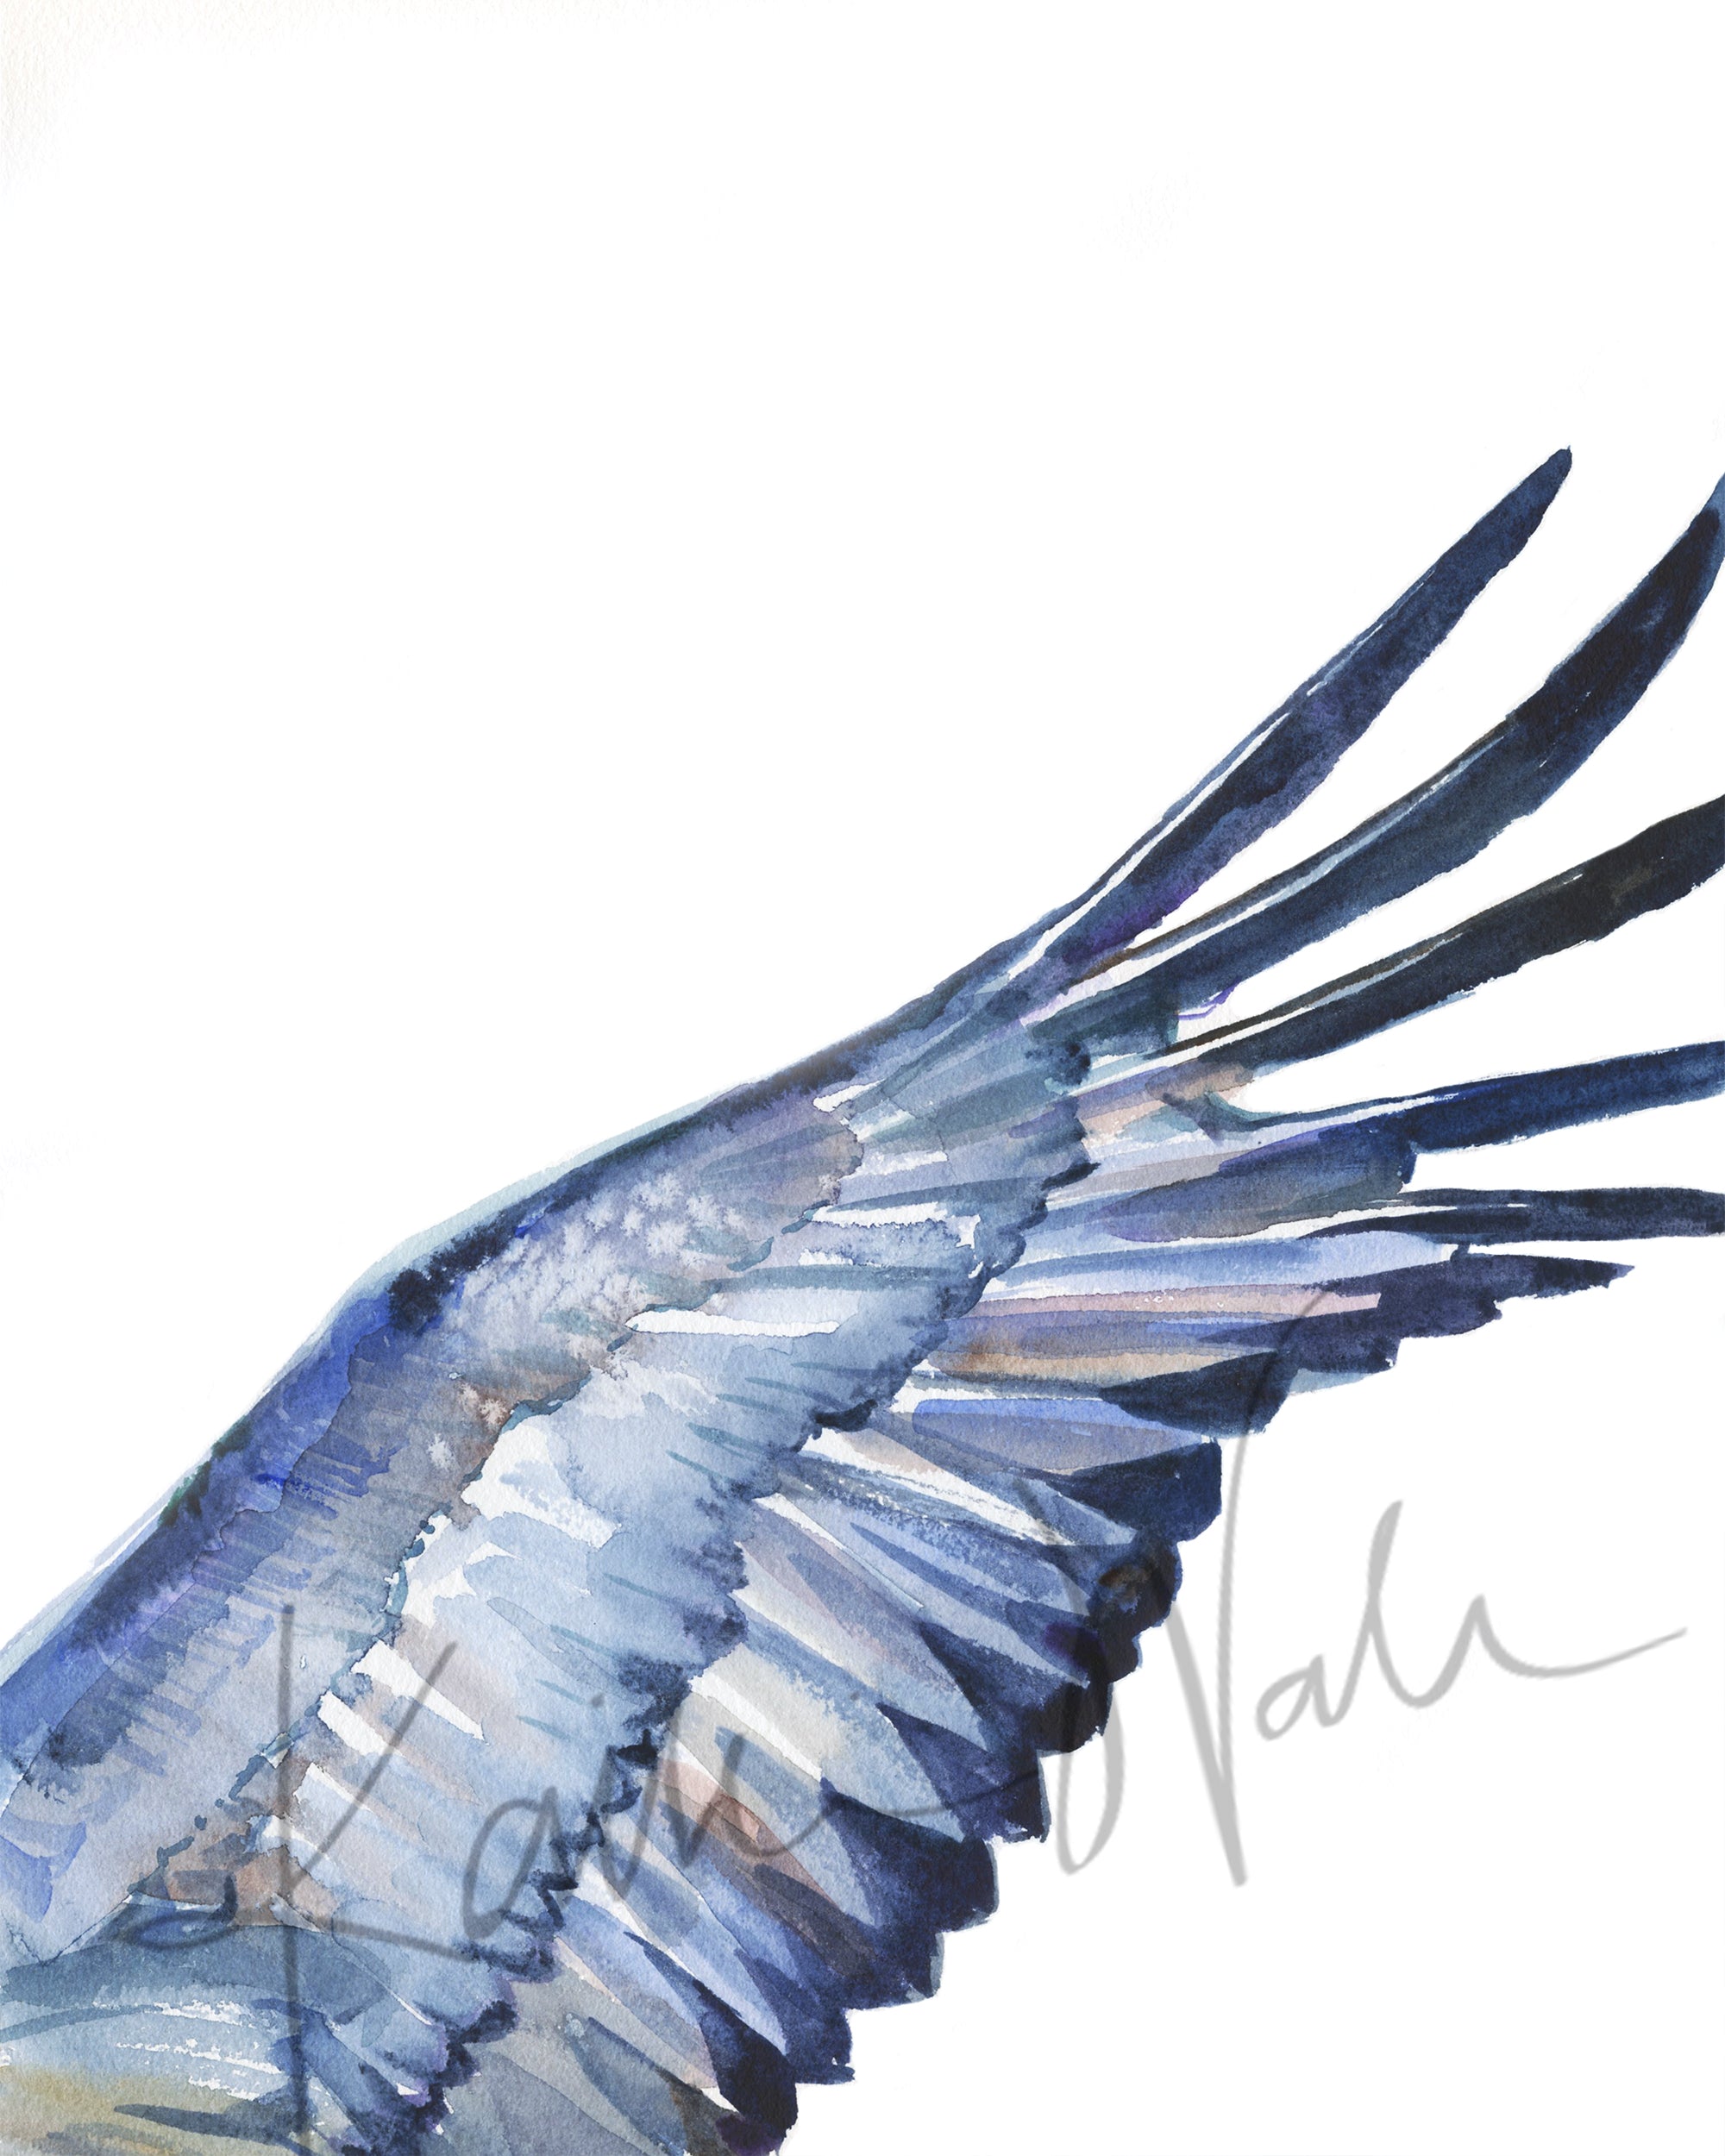 Unframed watercolor of a crane's wings with dark blue and brown feathers.